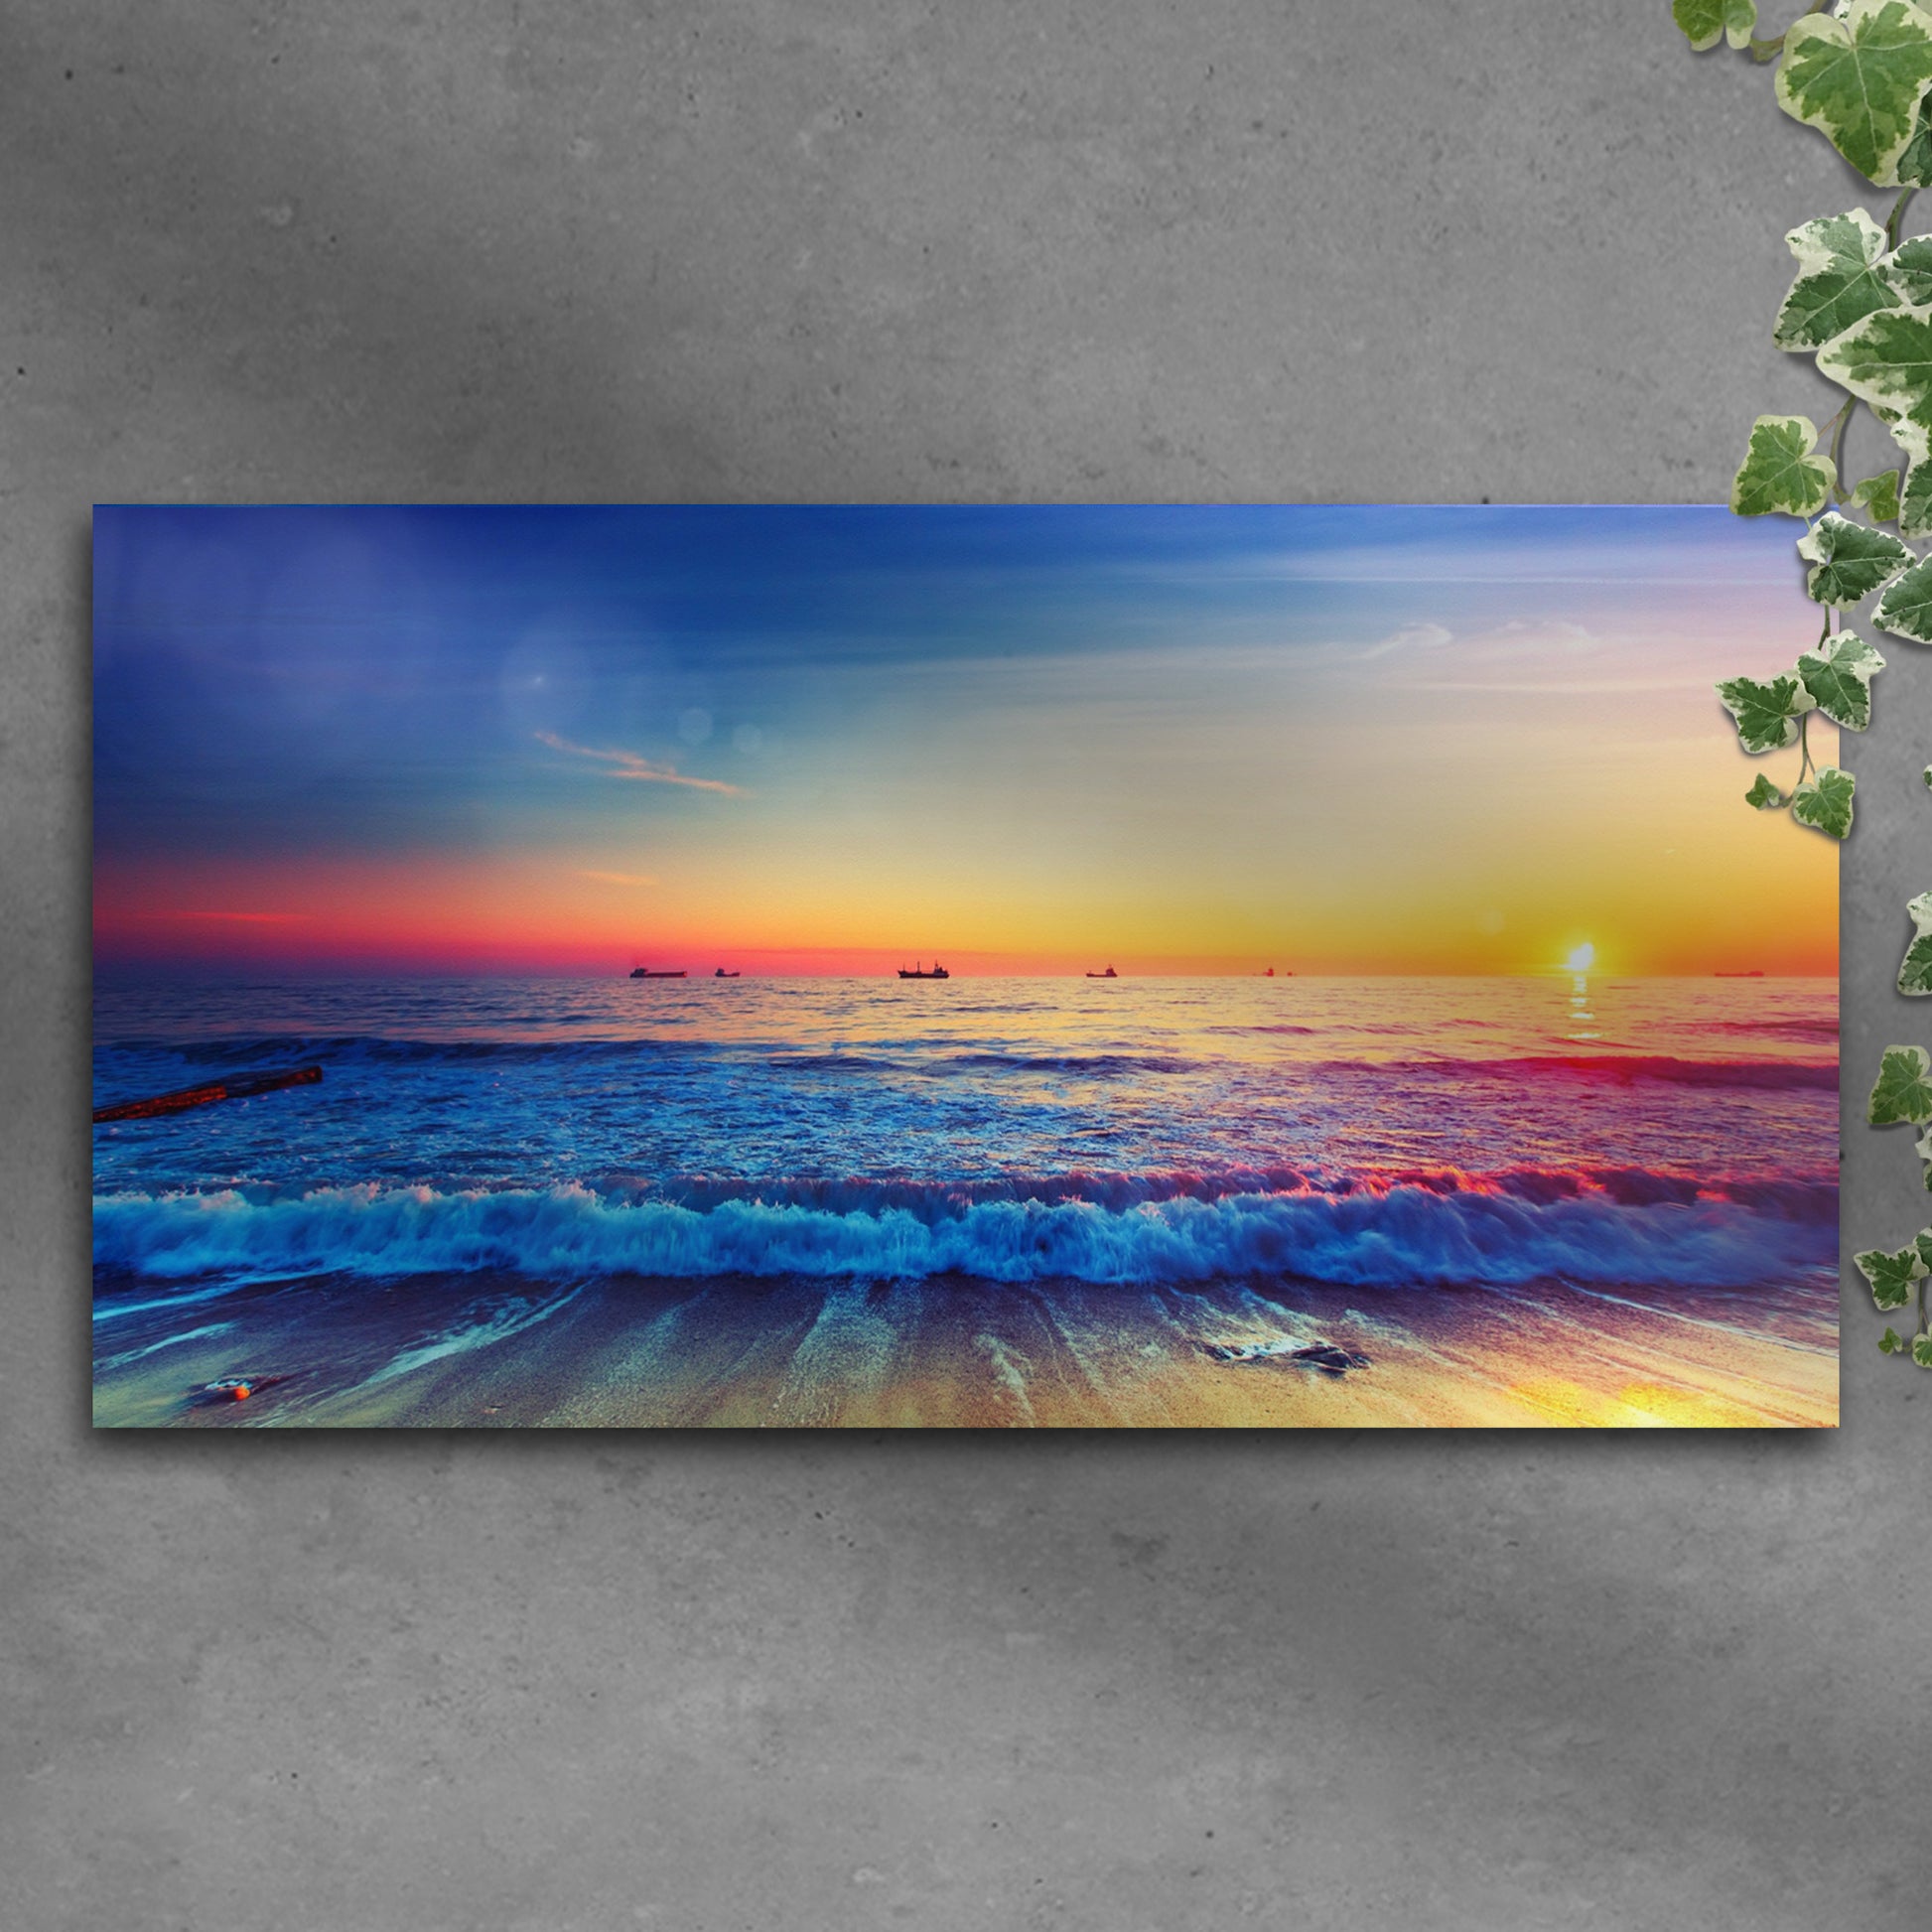 Sunrise Over The Ocean Canvas Wall Art - Image by Tailored Canvases